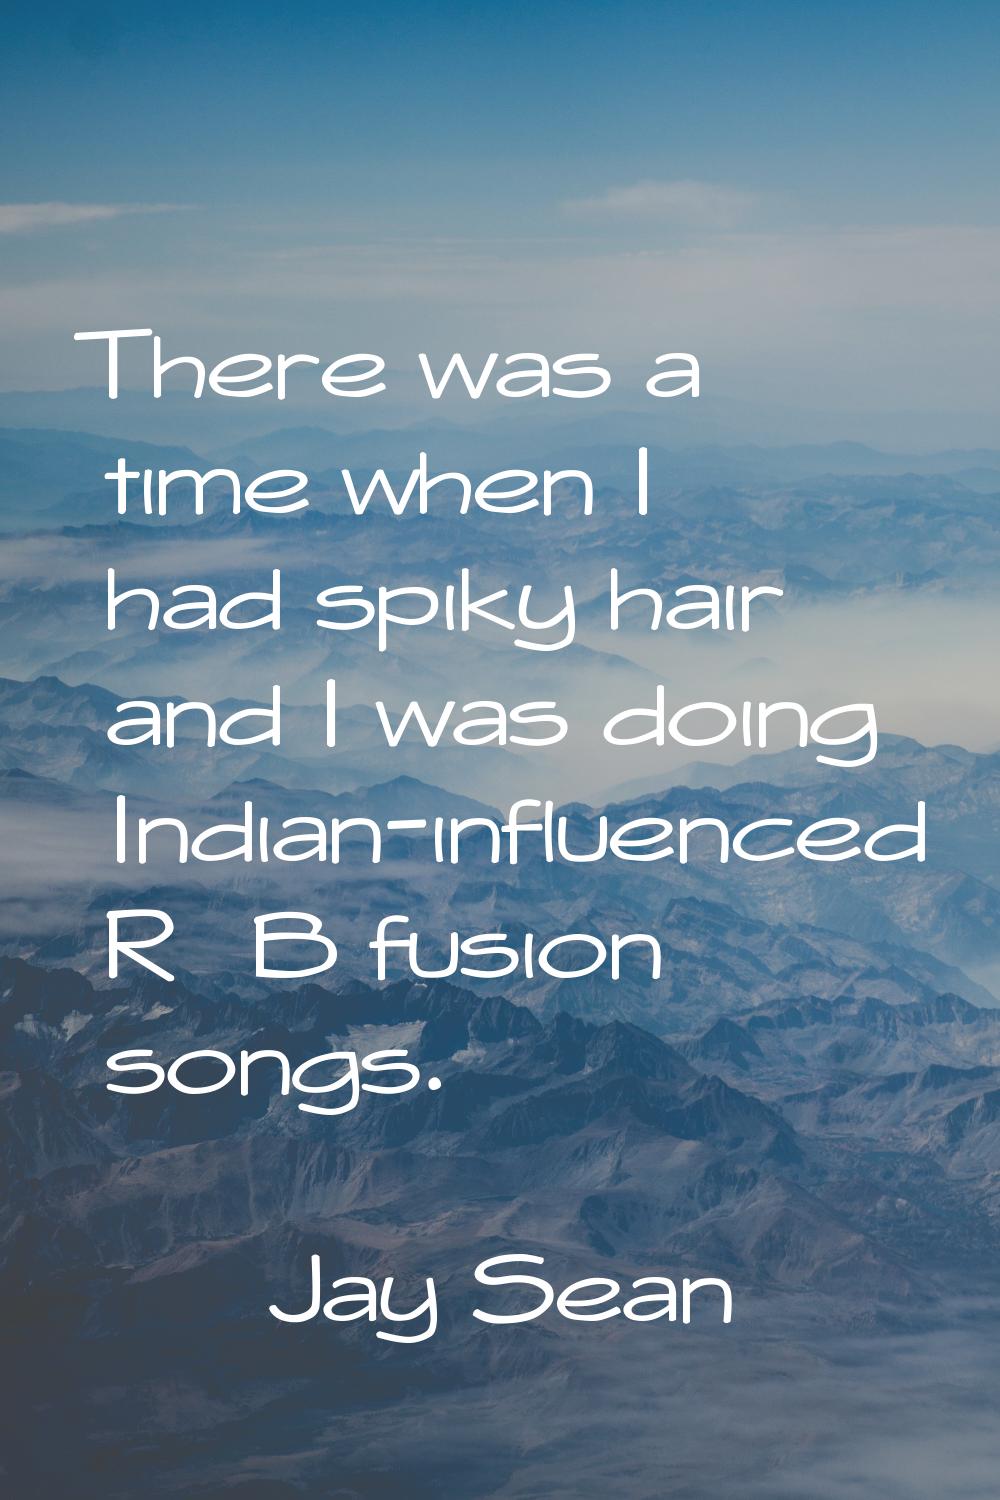 There was a time when I had spiky hair and I was doing Indian-influenced R&B fusion songs.